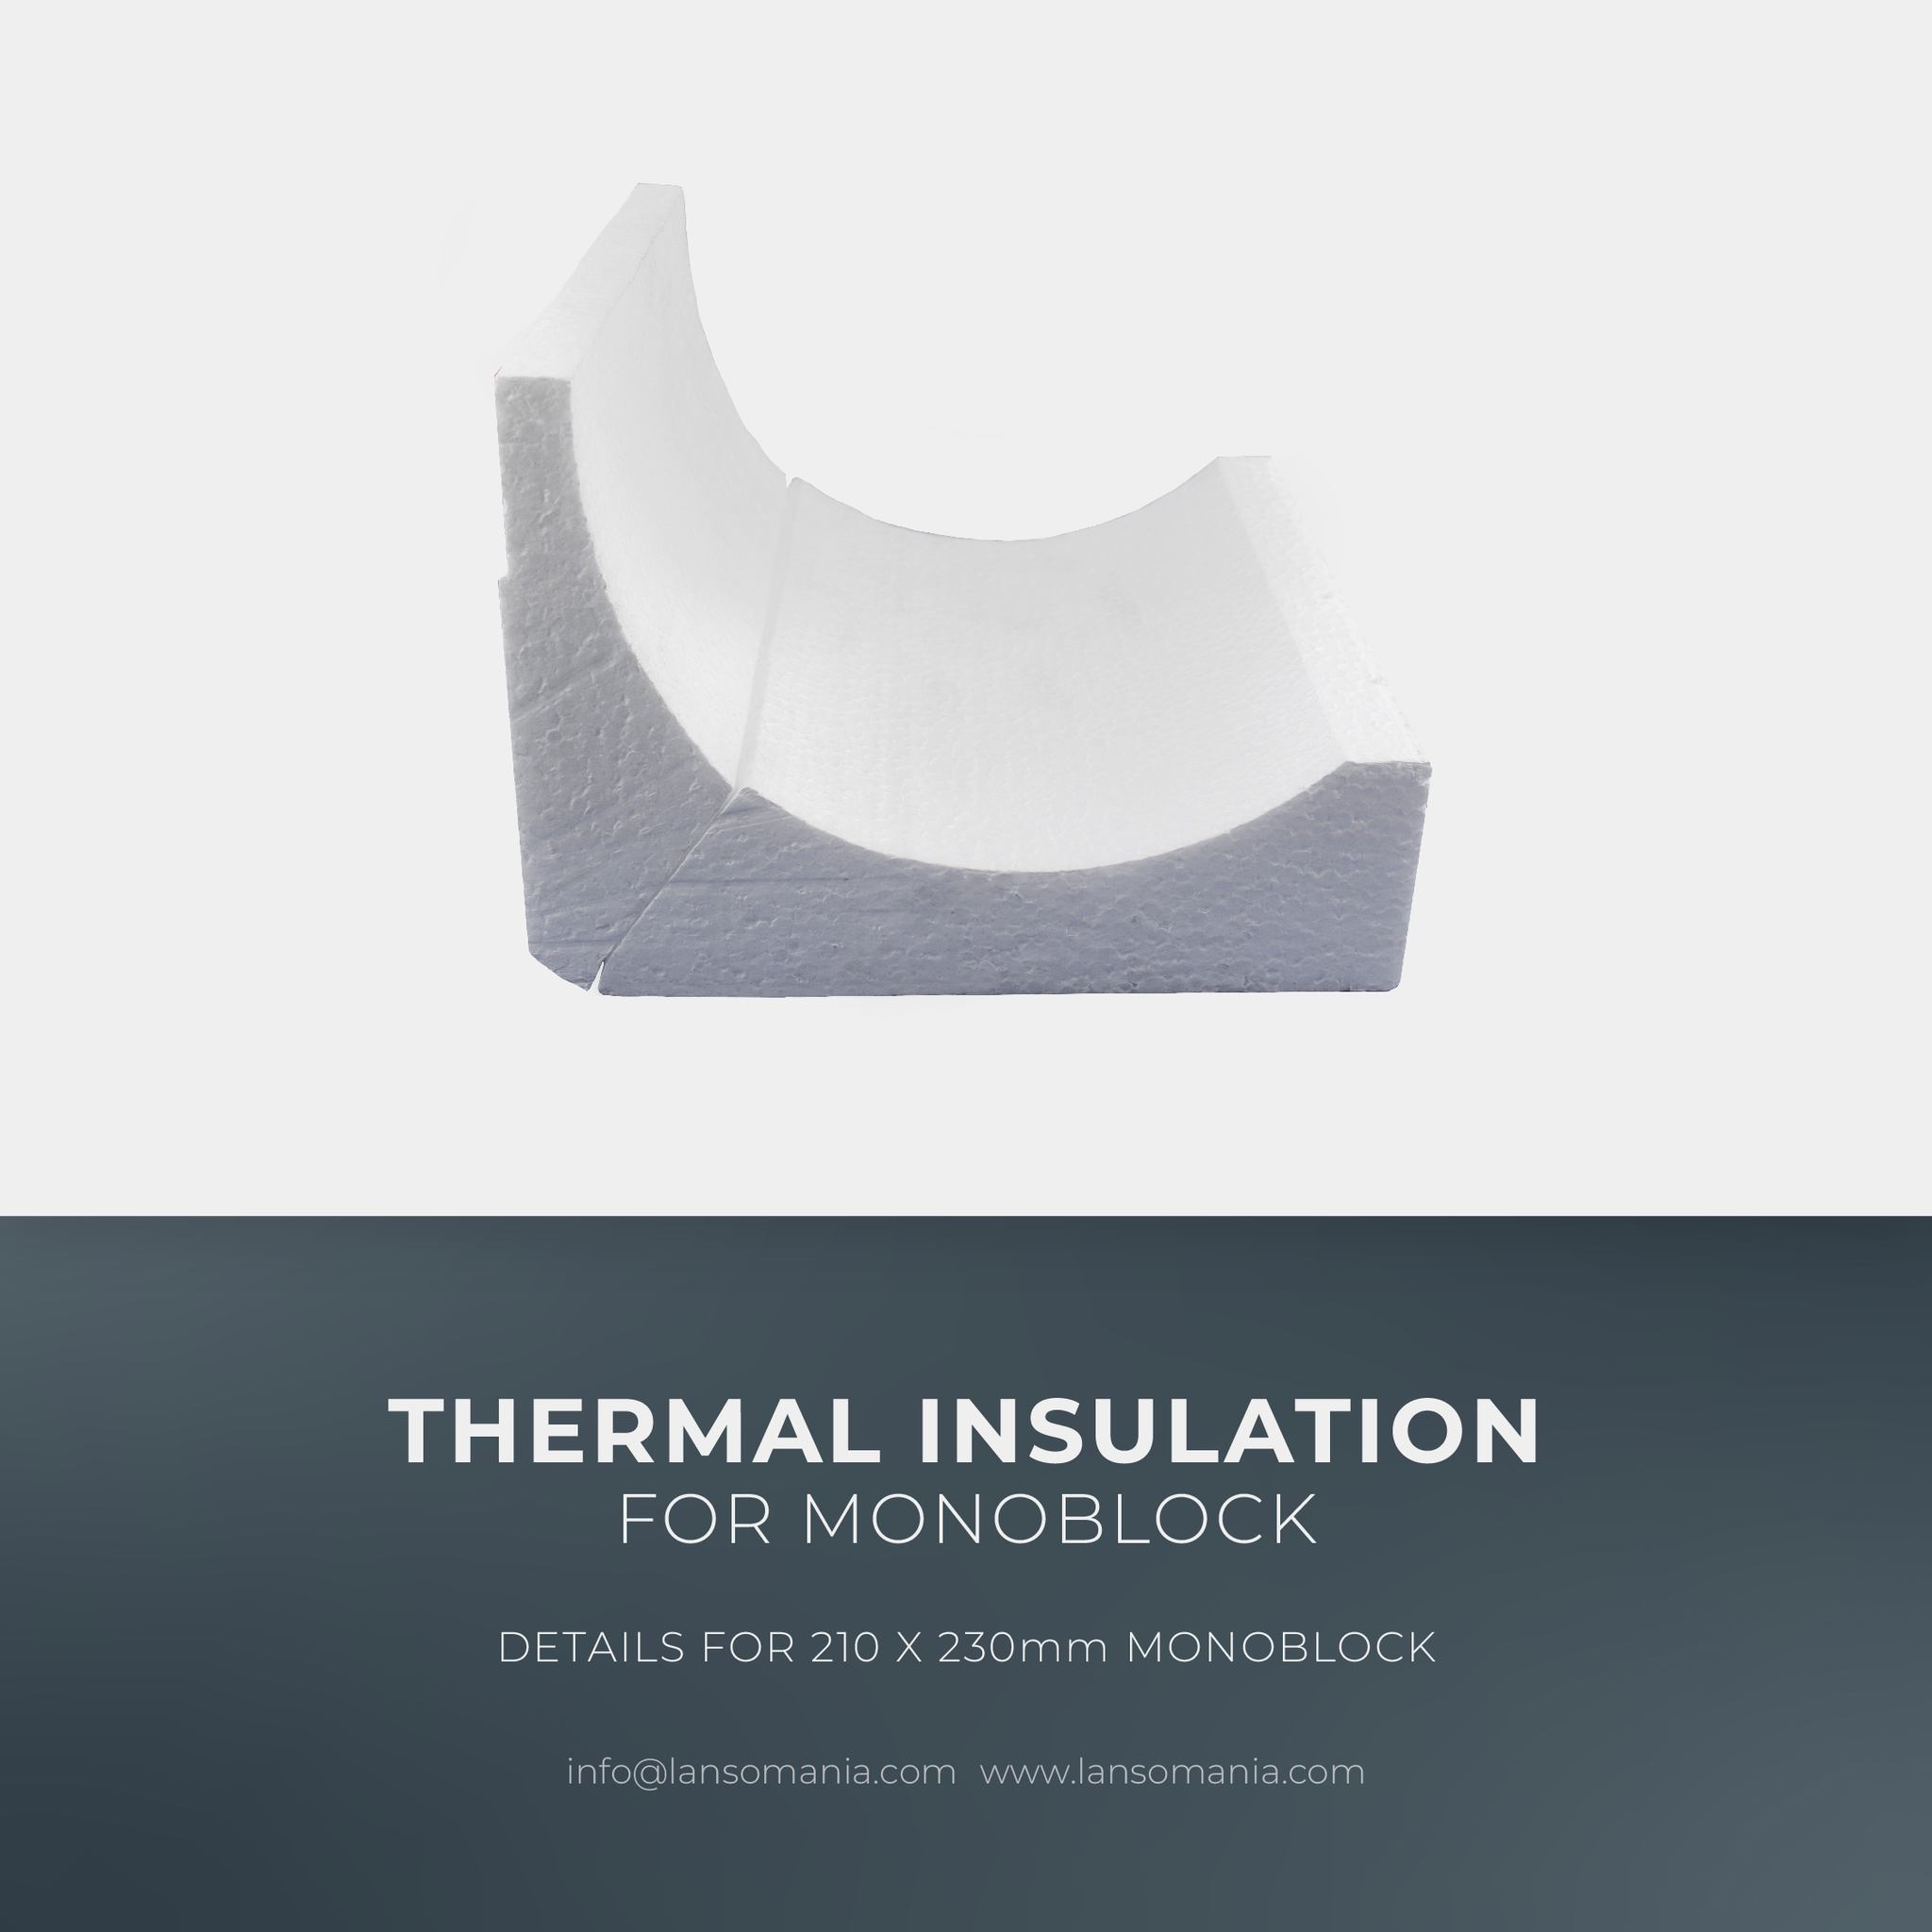 Thermal insulation for monoblock